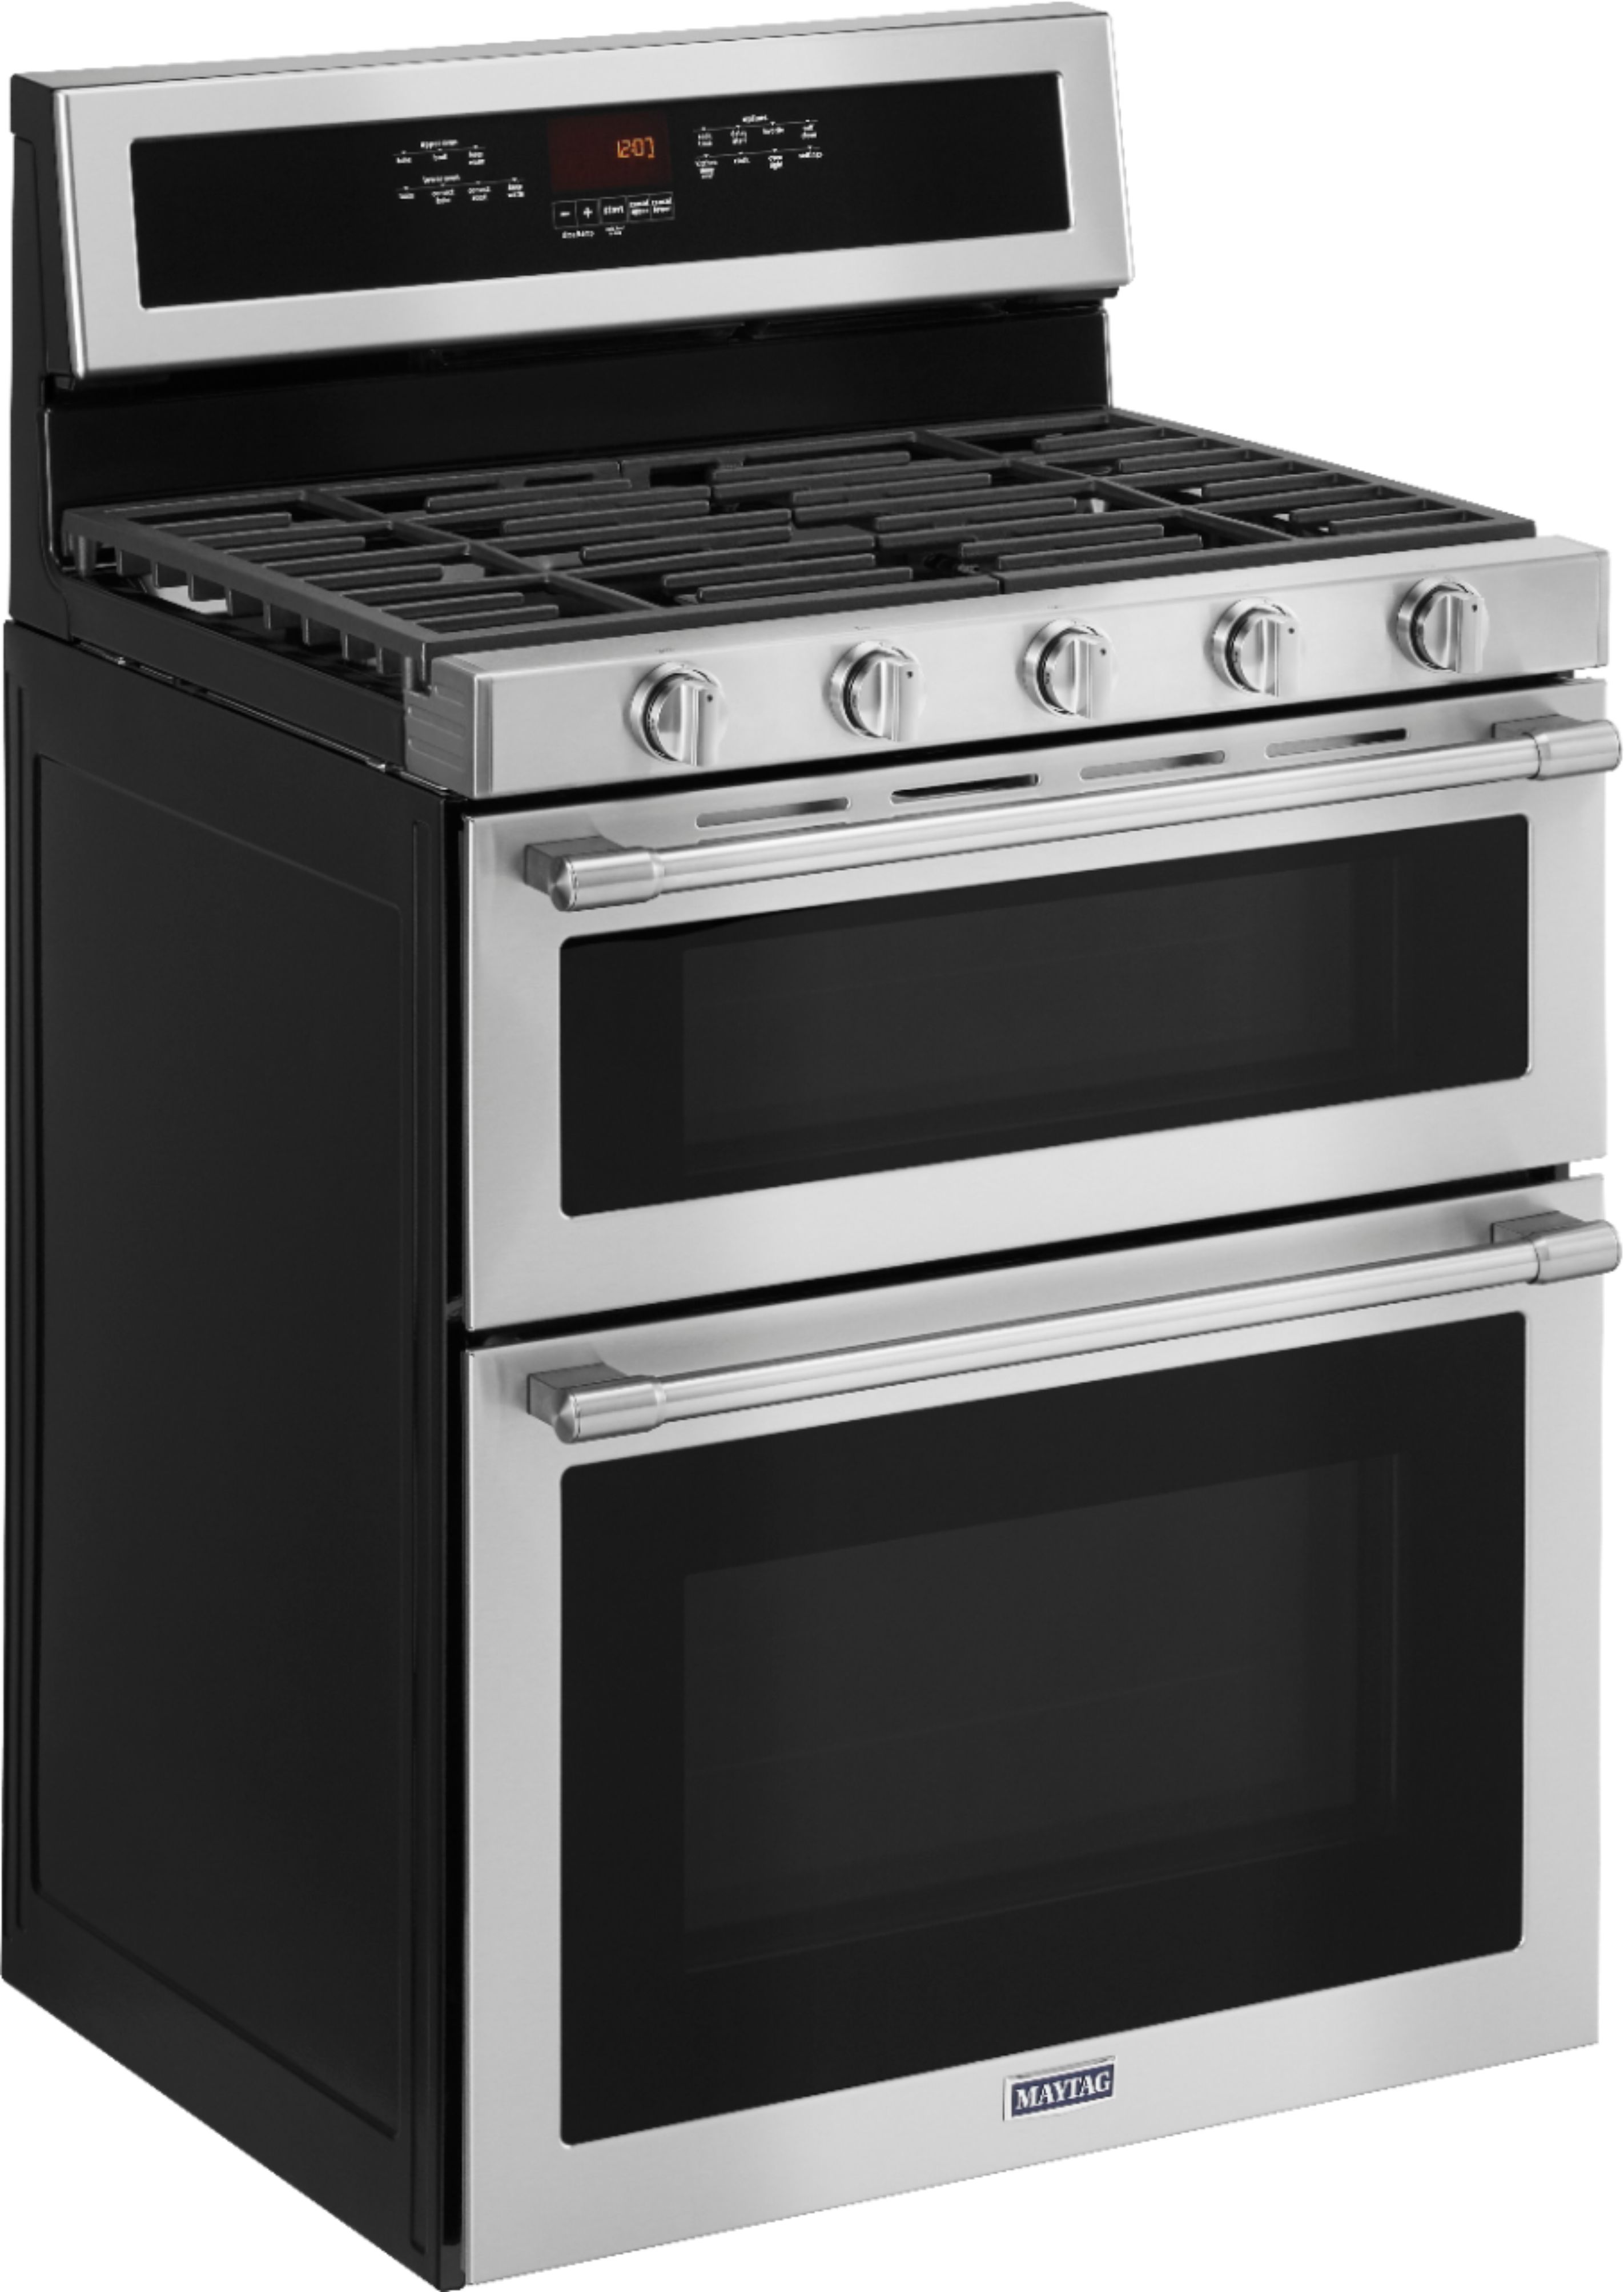 Angle View: GE - 5.6 Cu. Ft. Freestanding Gas Convection Range - Black stainless steel